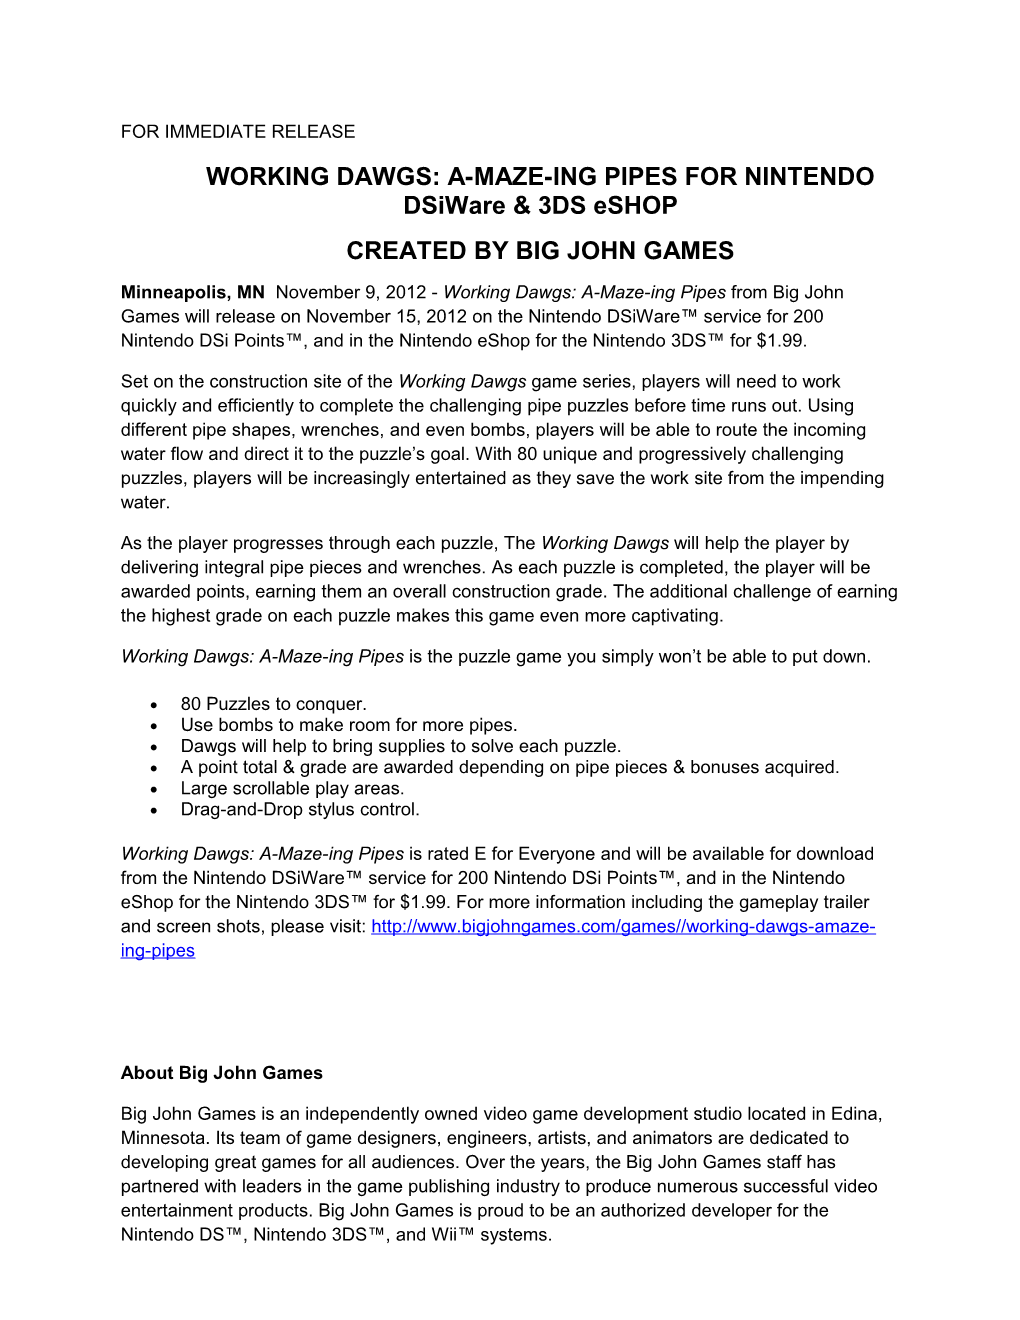 WORKING DAWGS: A-MAZE-ING PIPES for NINTENDO Dsiware & 3DS Eshop